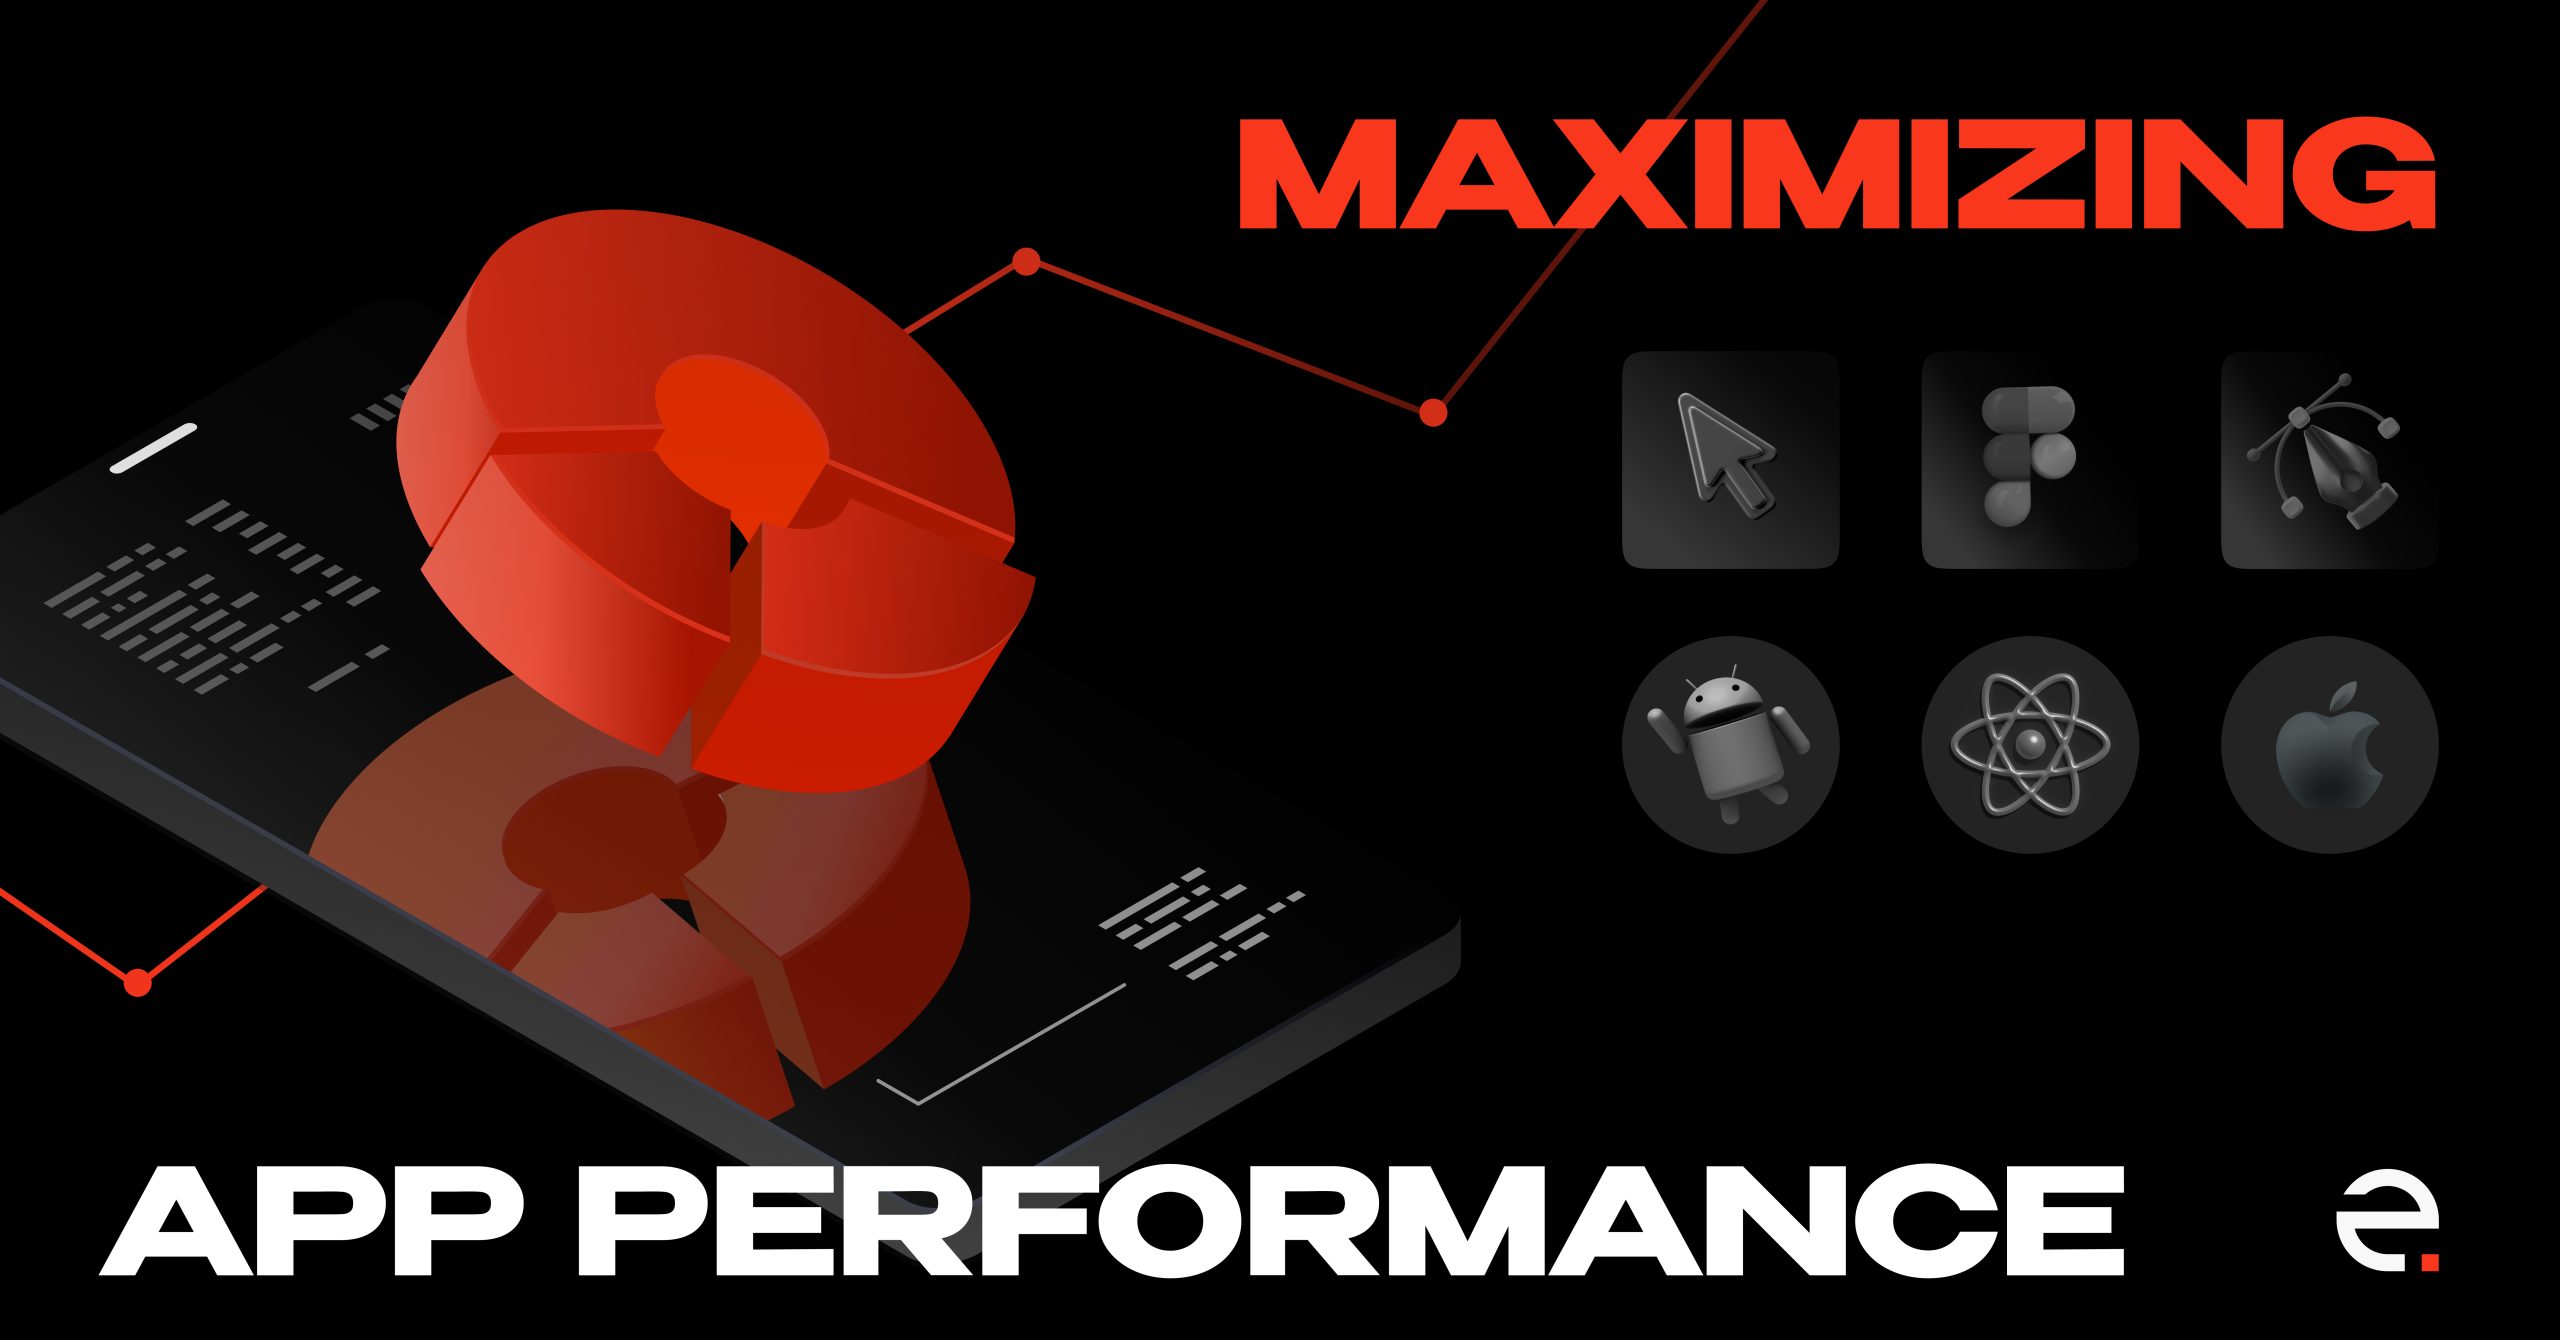 Maximizing App Performance with the Latest Technologies_1